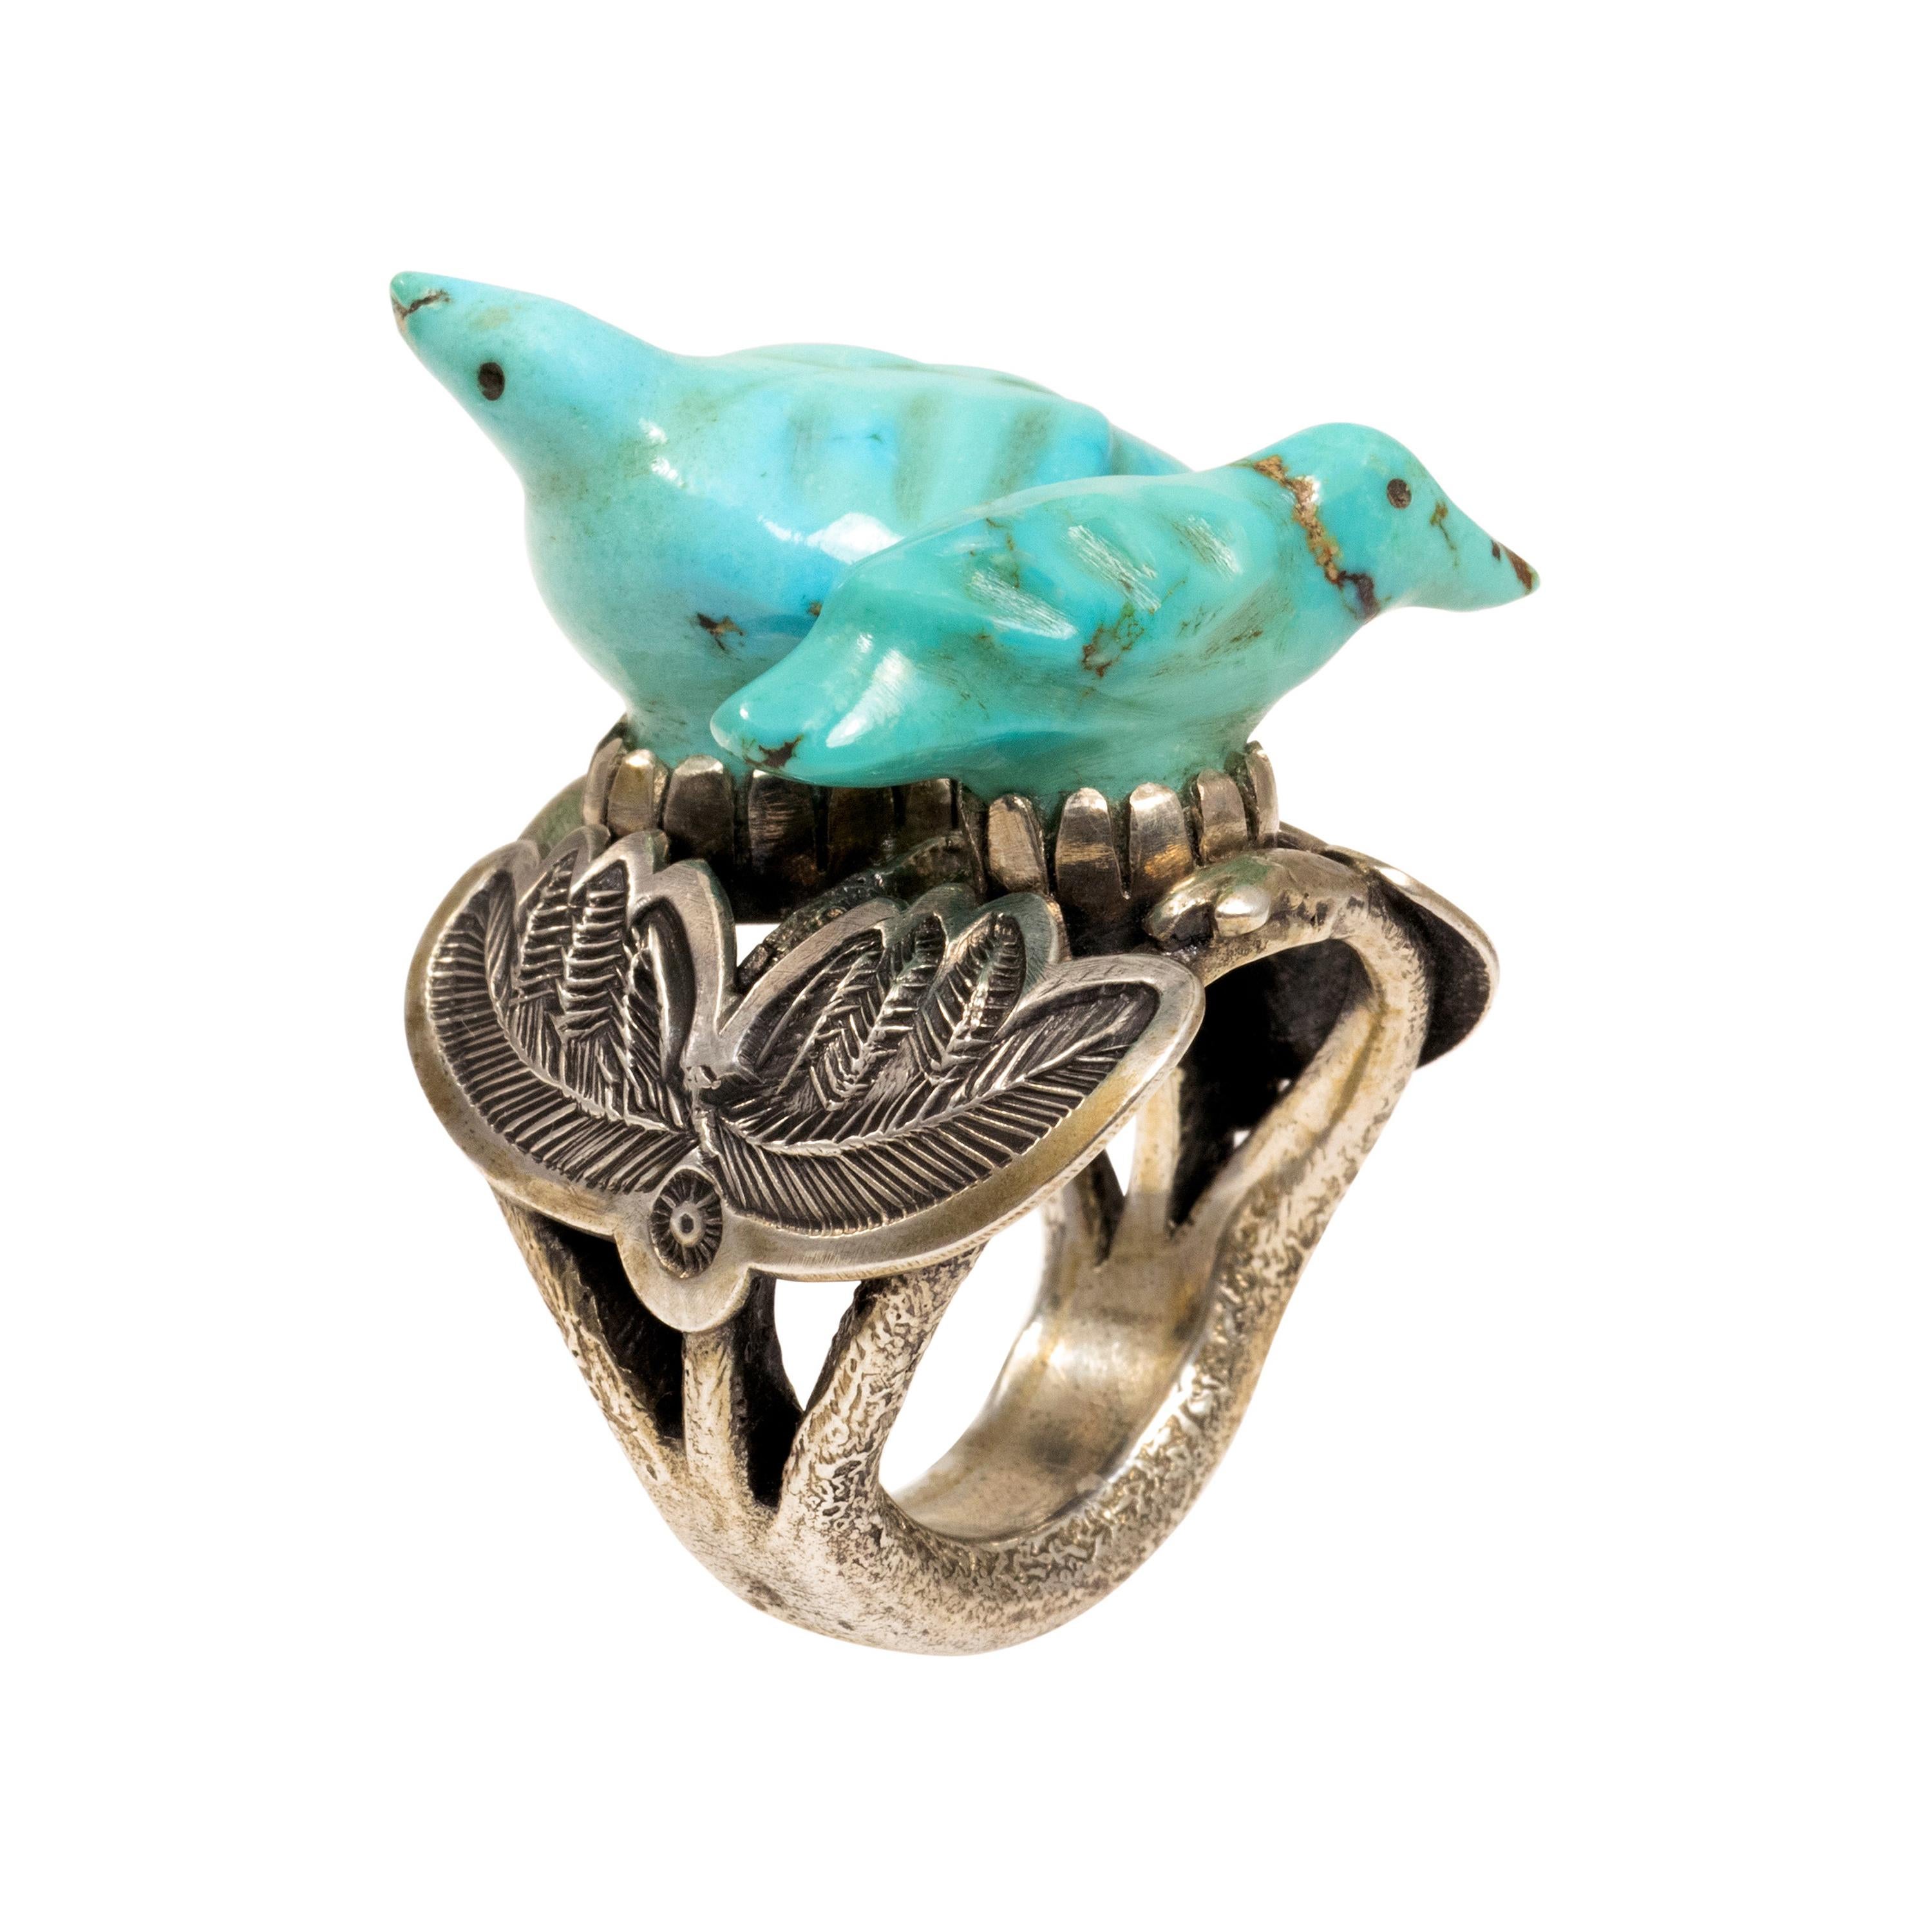 Leekya Deyuse  Carved Turquoise Birds and Silver Ring circa 1940